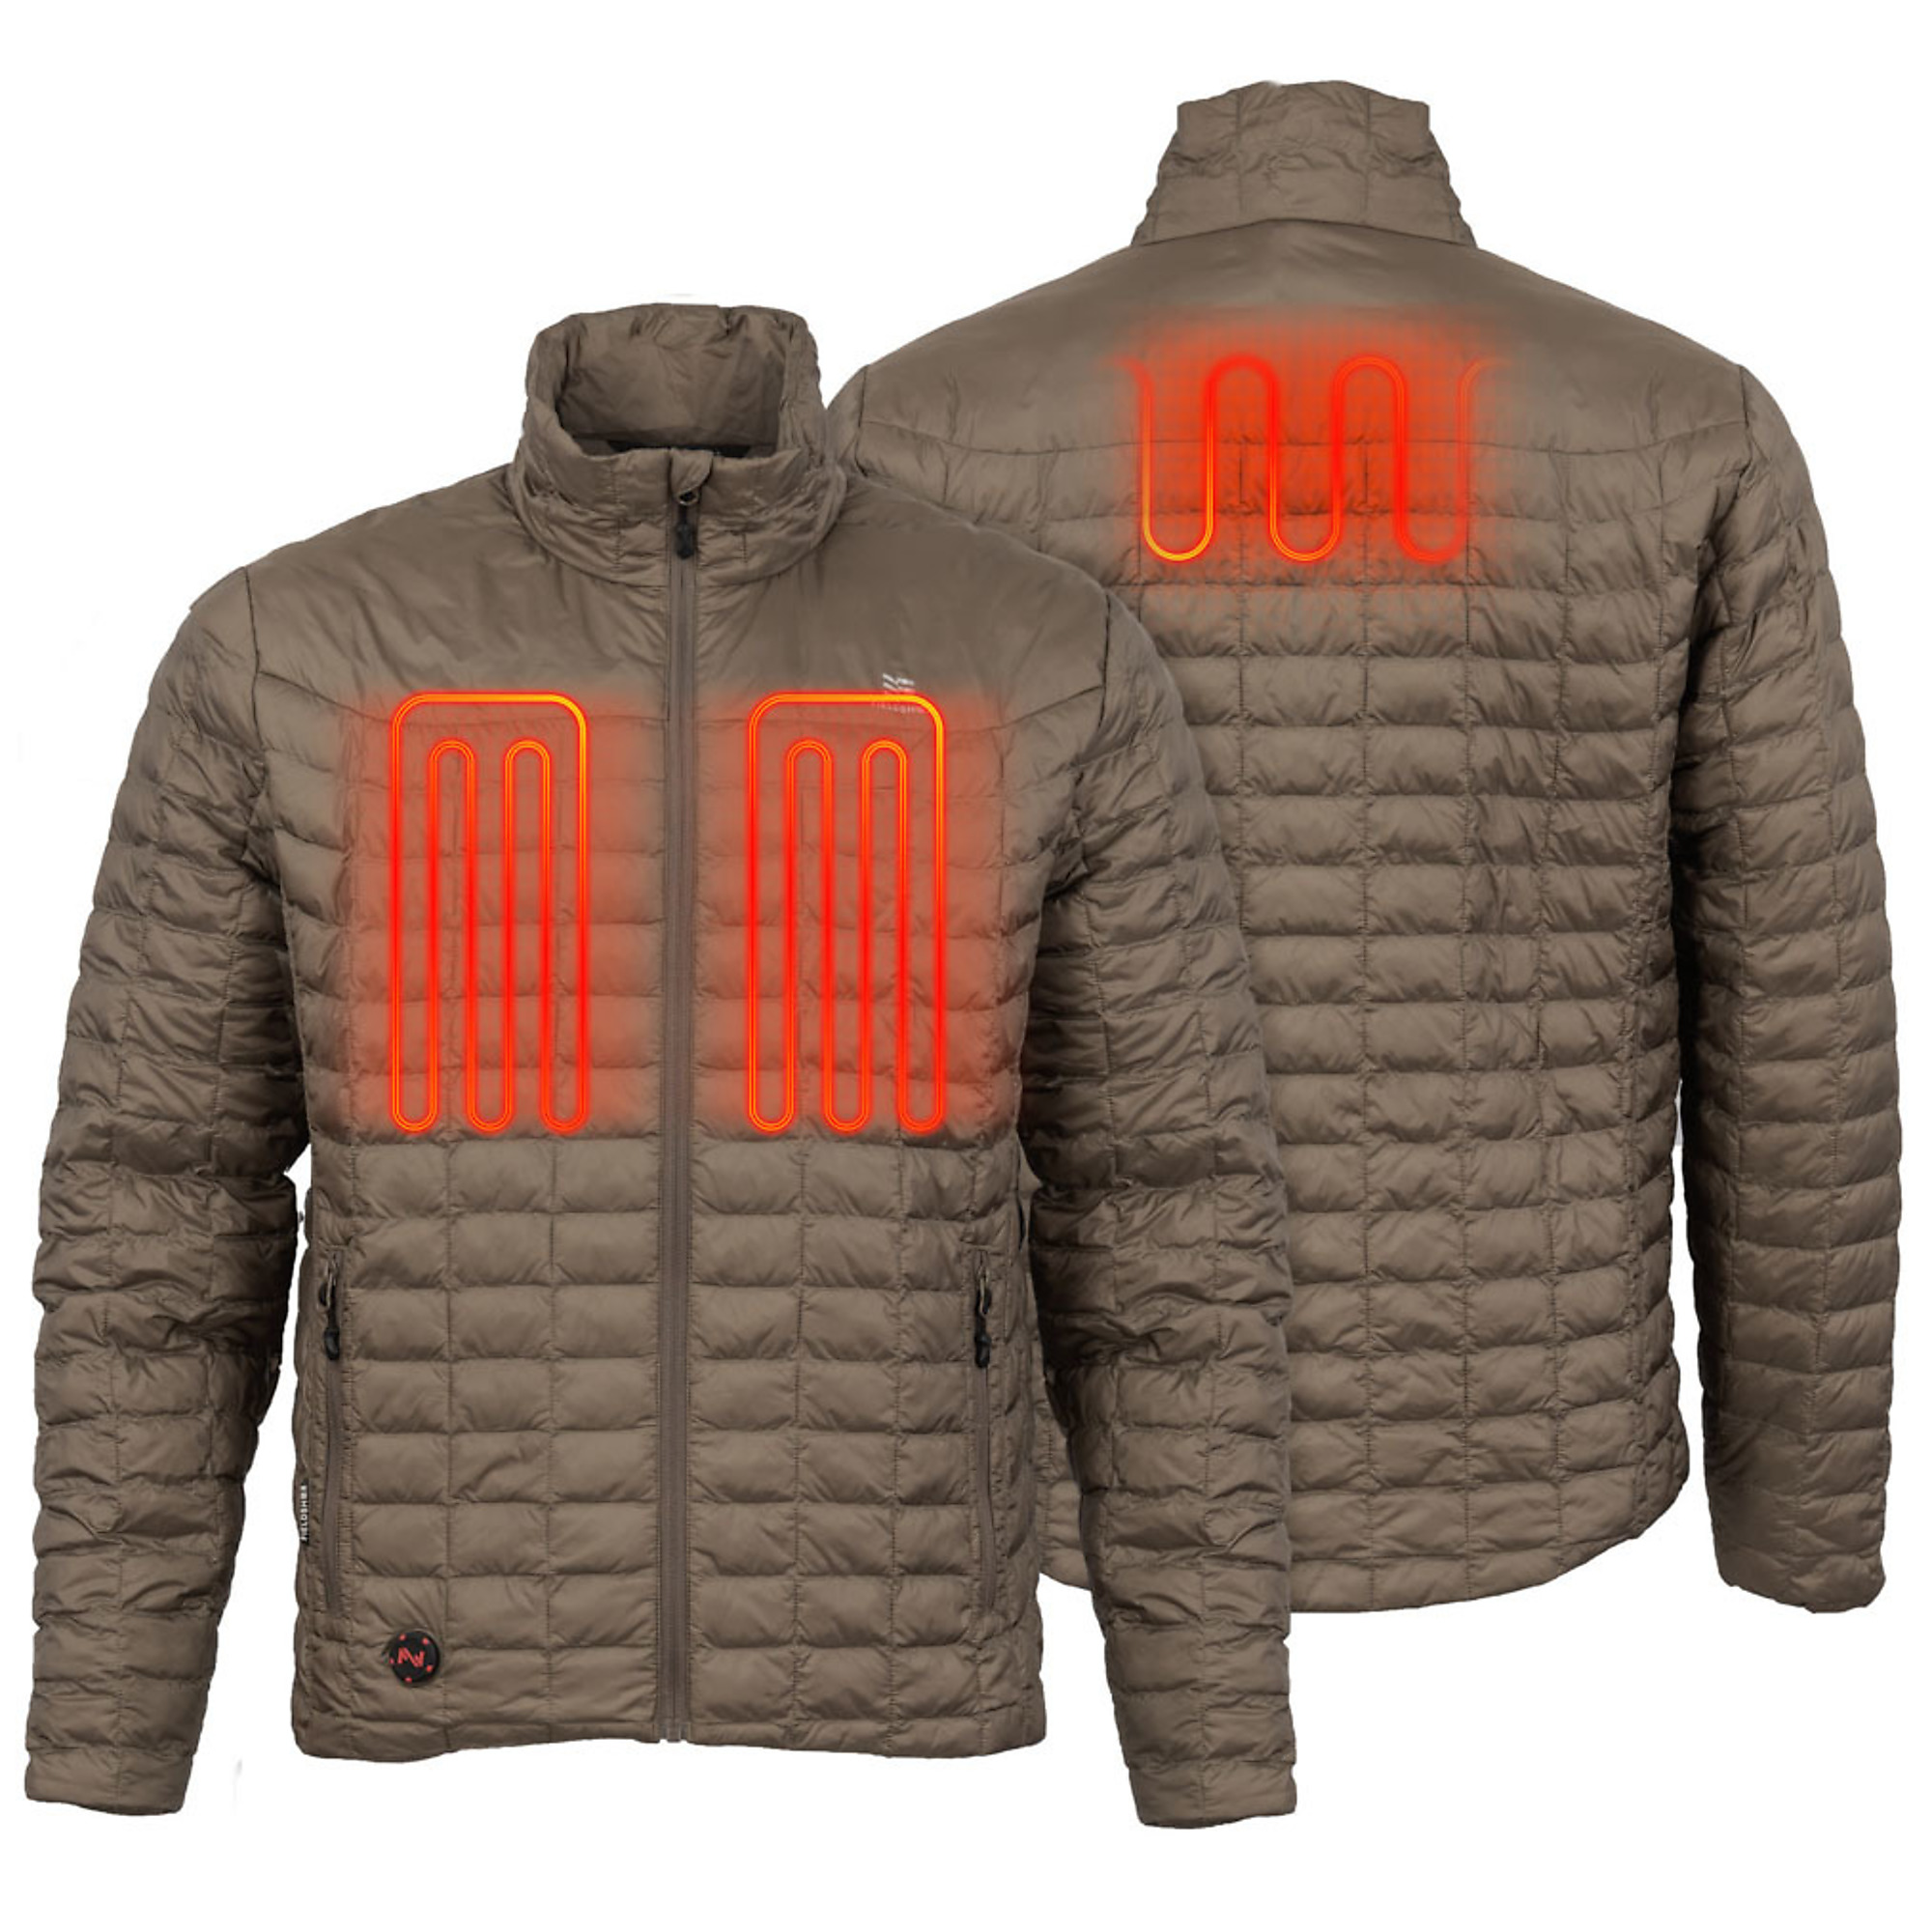 Fieldsheer, Men's Backcountry Heated Jacket with 7.4v Battery, Size M, Color Tan, Model MWMJ04340321